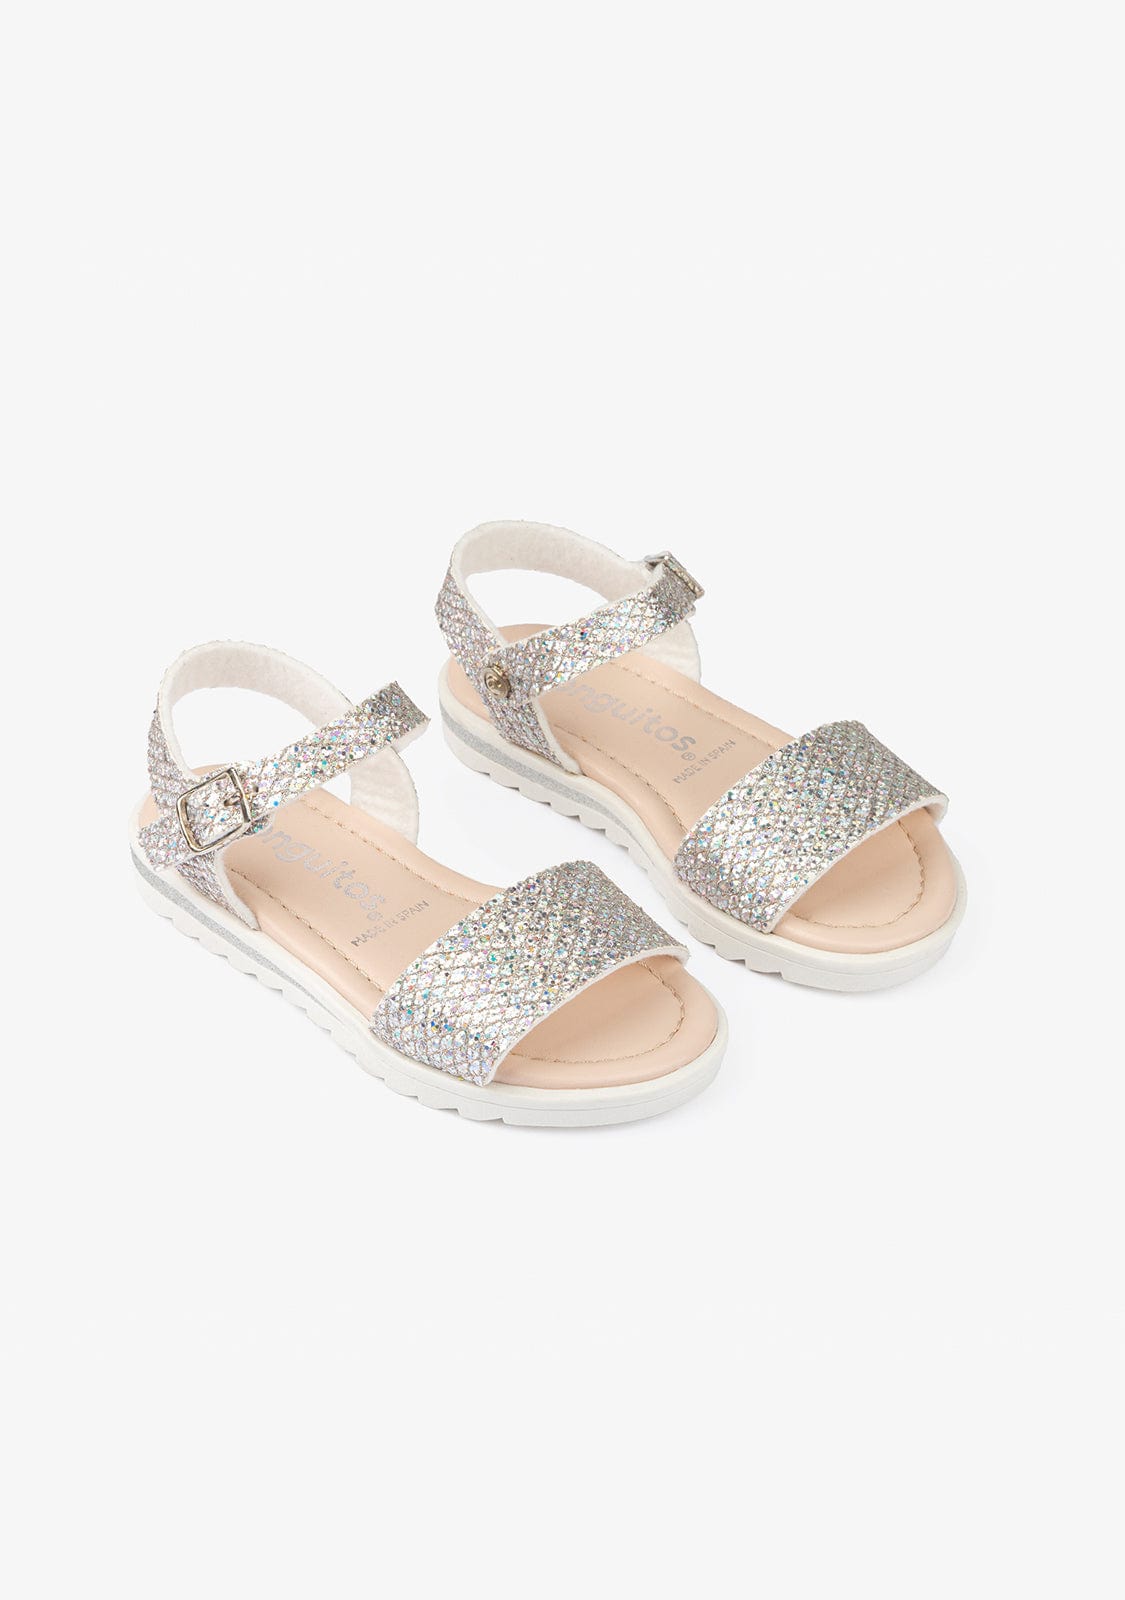 CONGUITOS Shoes Girl's Glitter Multi-Silver Sandals